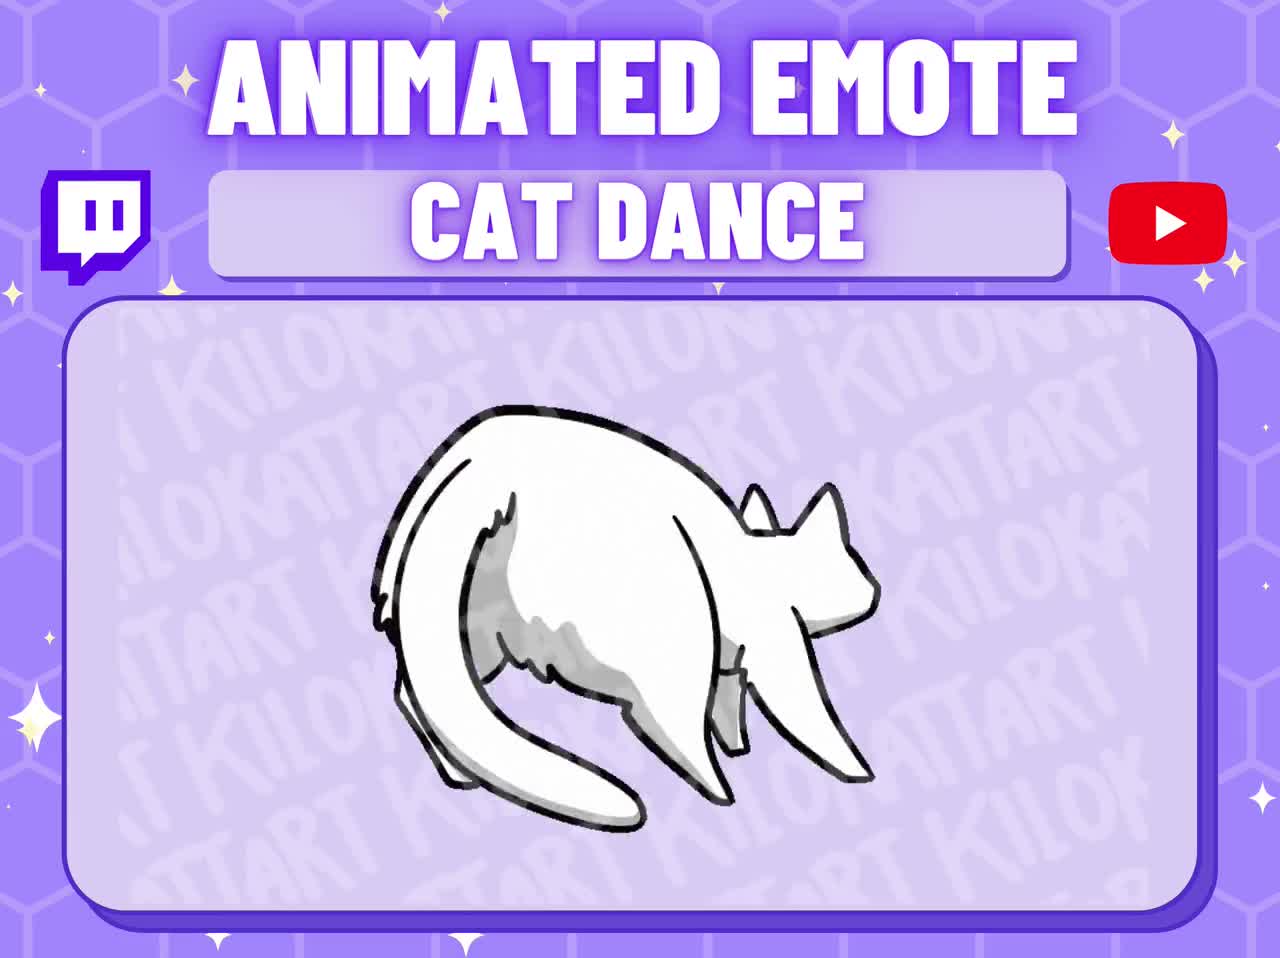 I just uploaded my version of the sad cat dance to my channel